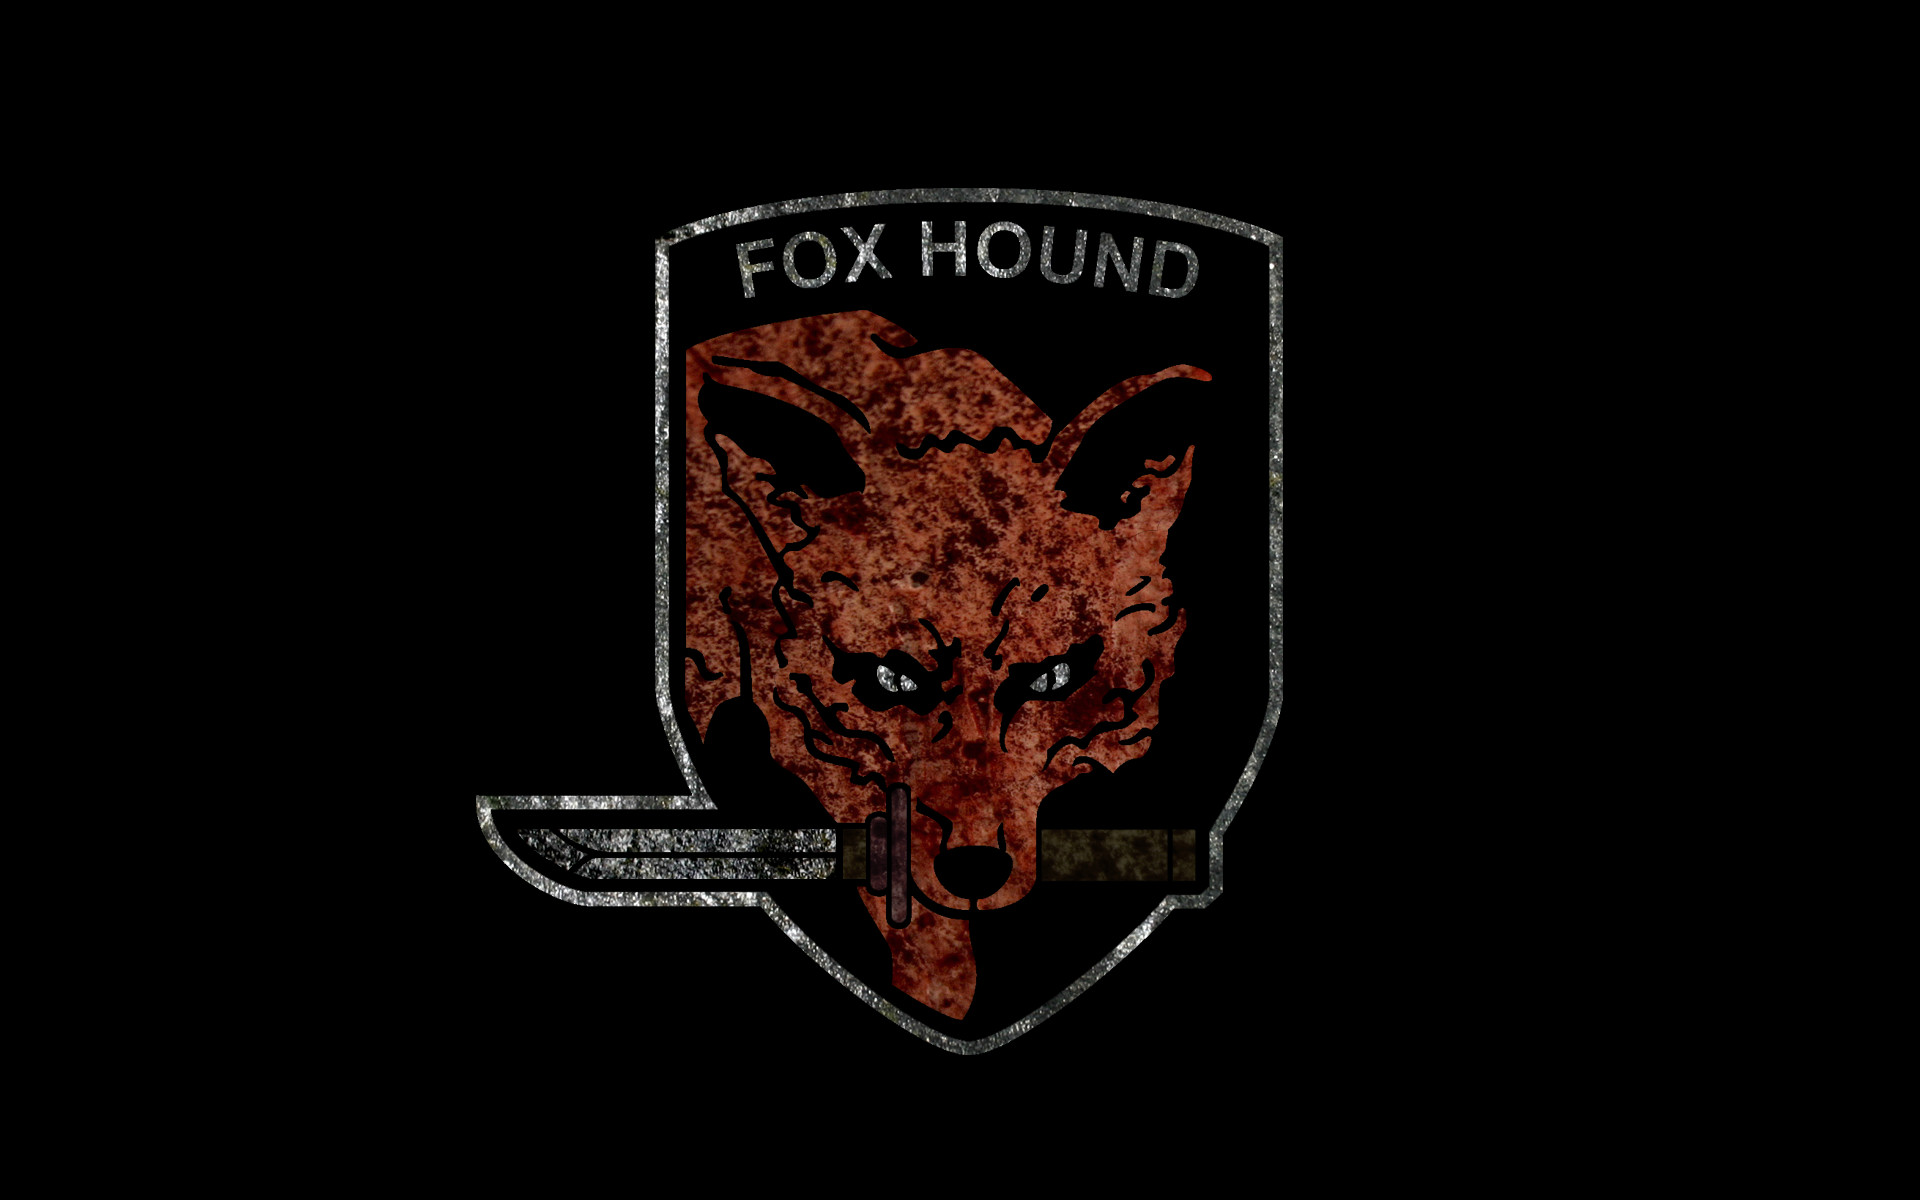 Metal Gear Solid Video Games Mgs Fox Hound 695129 With Resolutions .